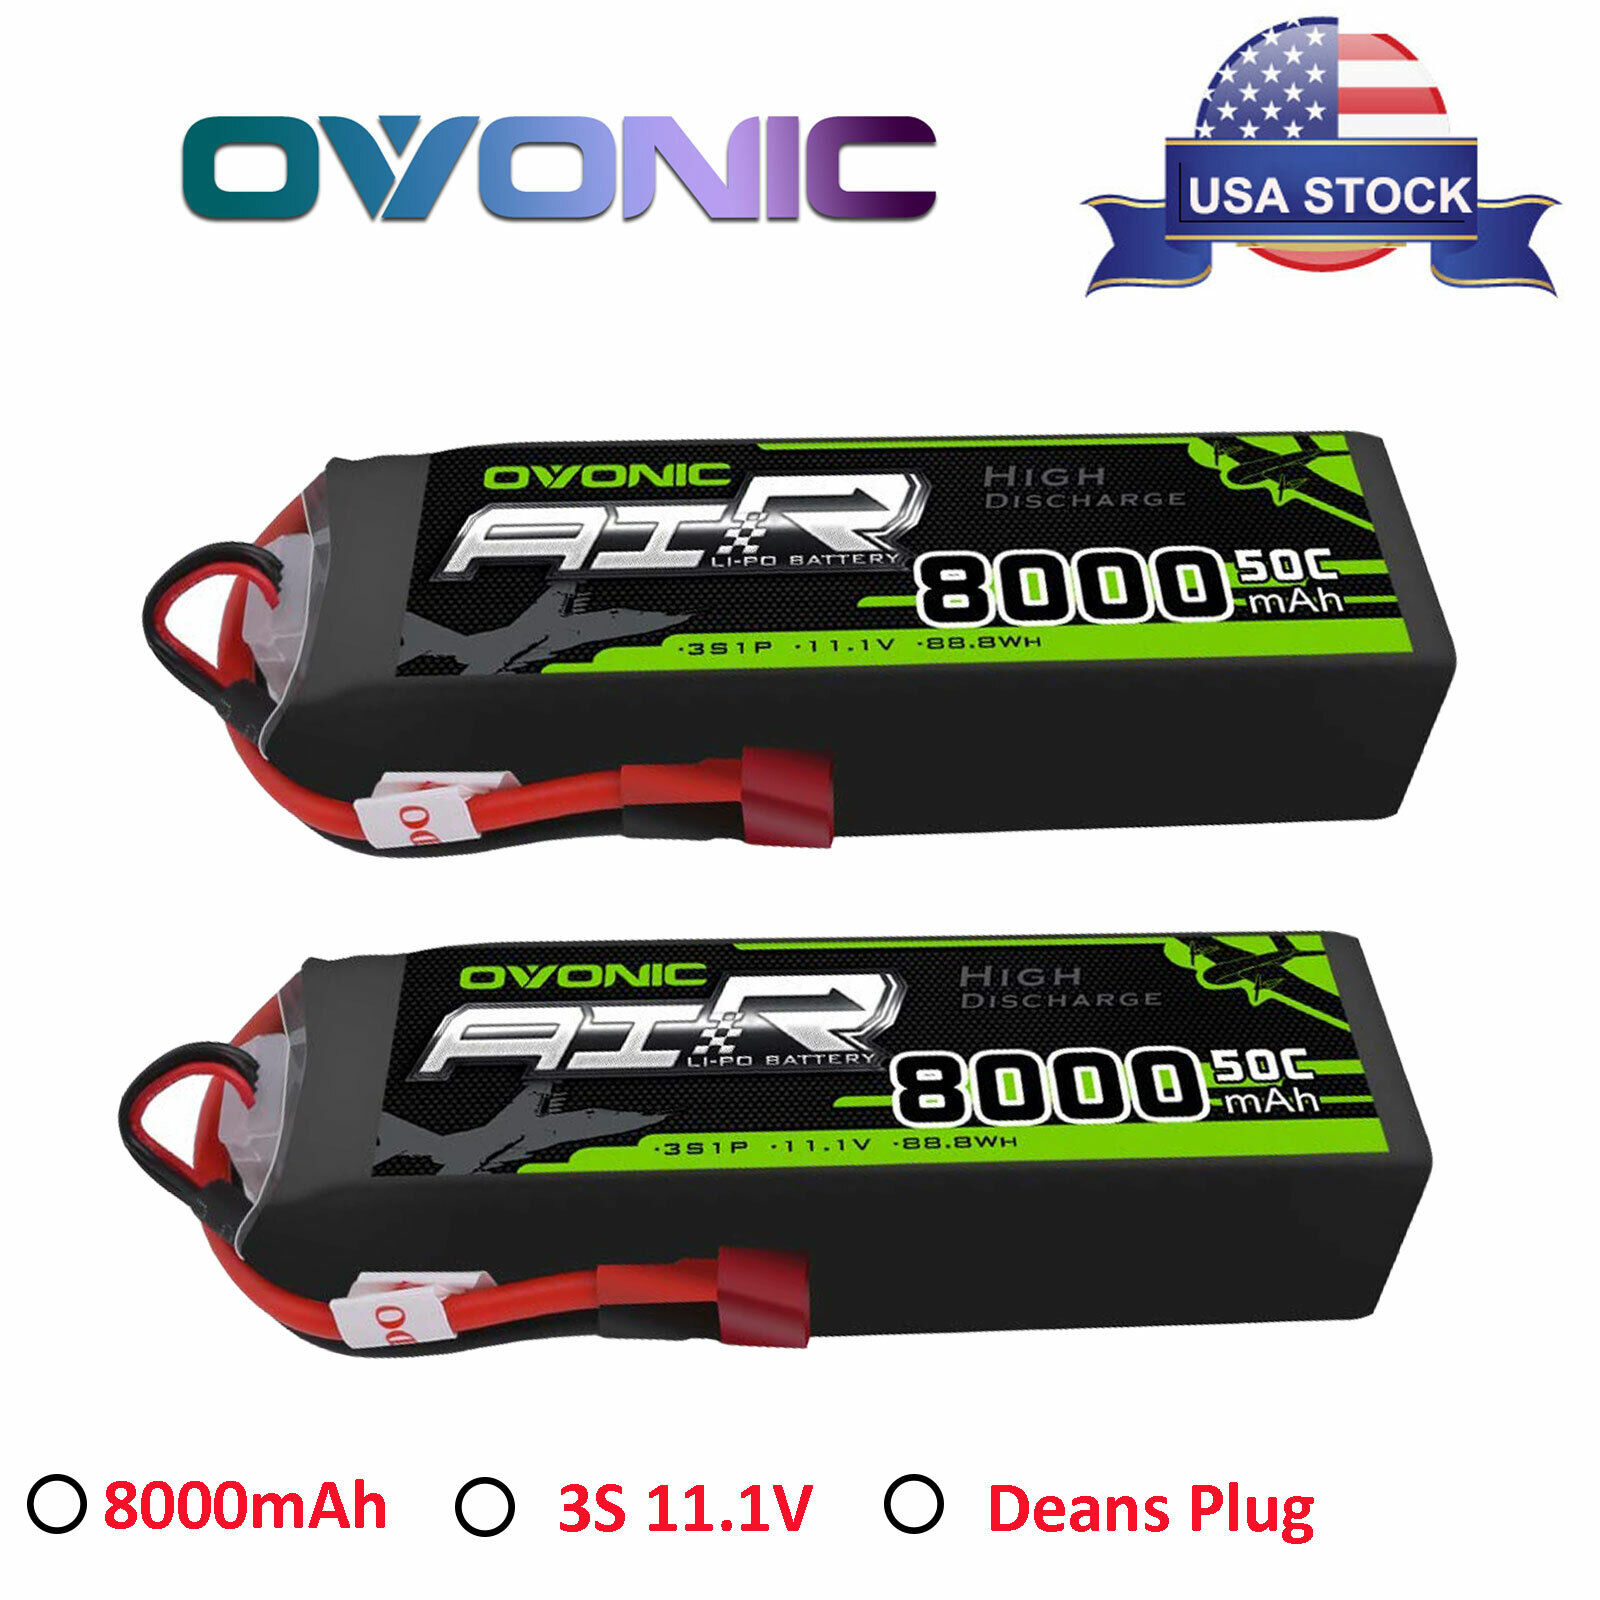 2Pcs OVONIC 8000mAh 50C 3S 11.1V Lipo Battery Deans Plug For RC Car Truck Buggy Ovonic O-50C-8000-3S1P-T*2P